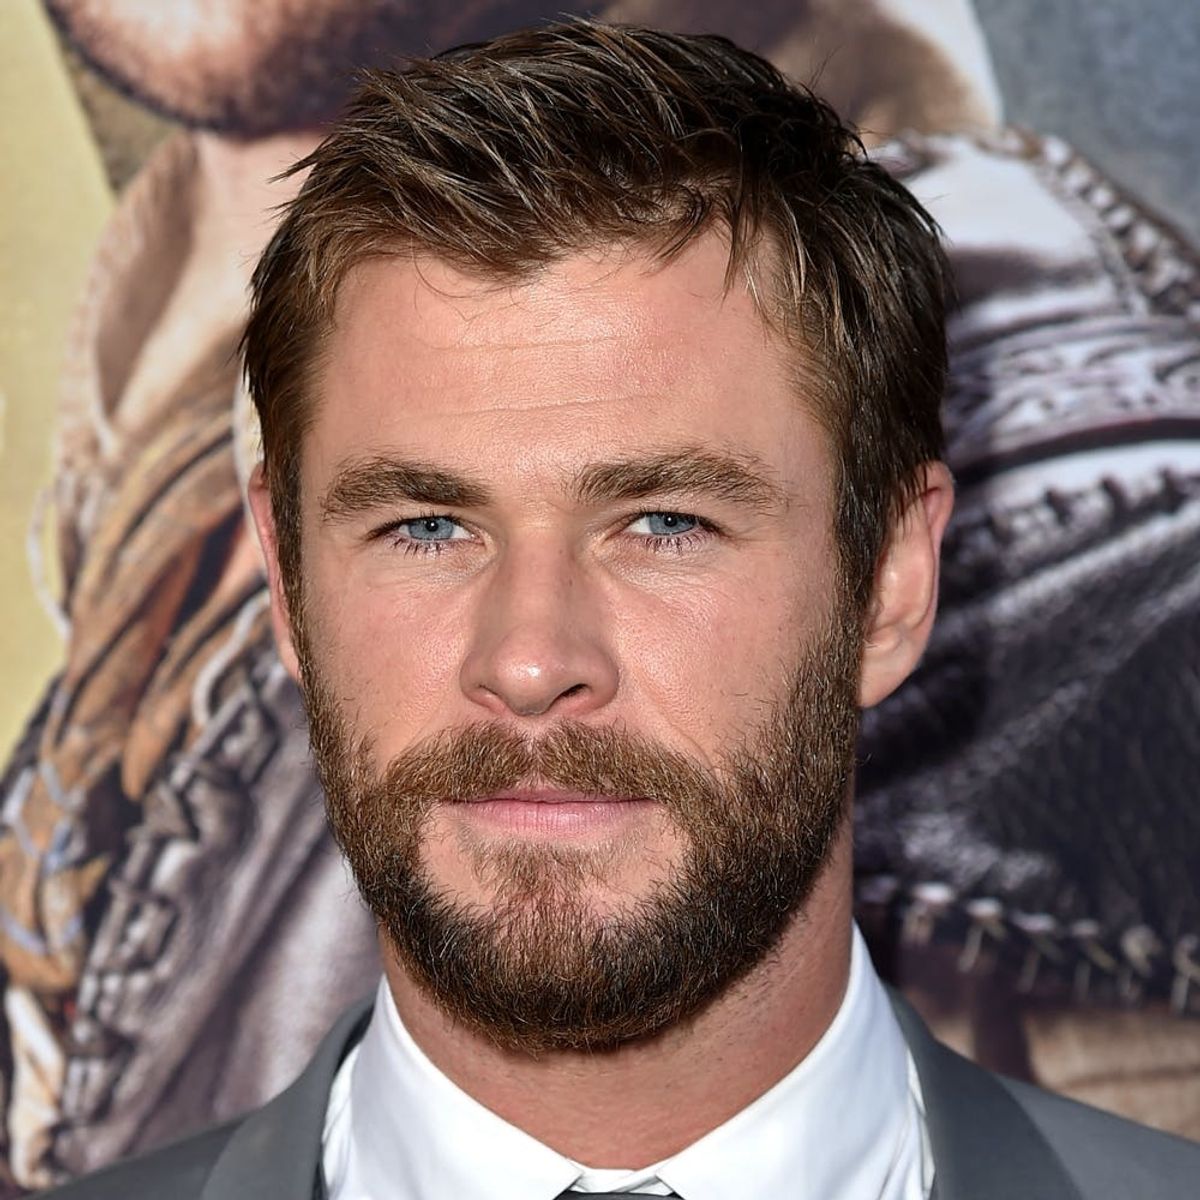 This Is the Unexpected Offense Chris Hemsworth Is Apologizing For